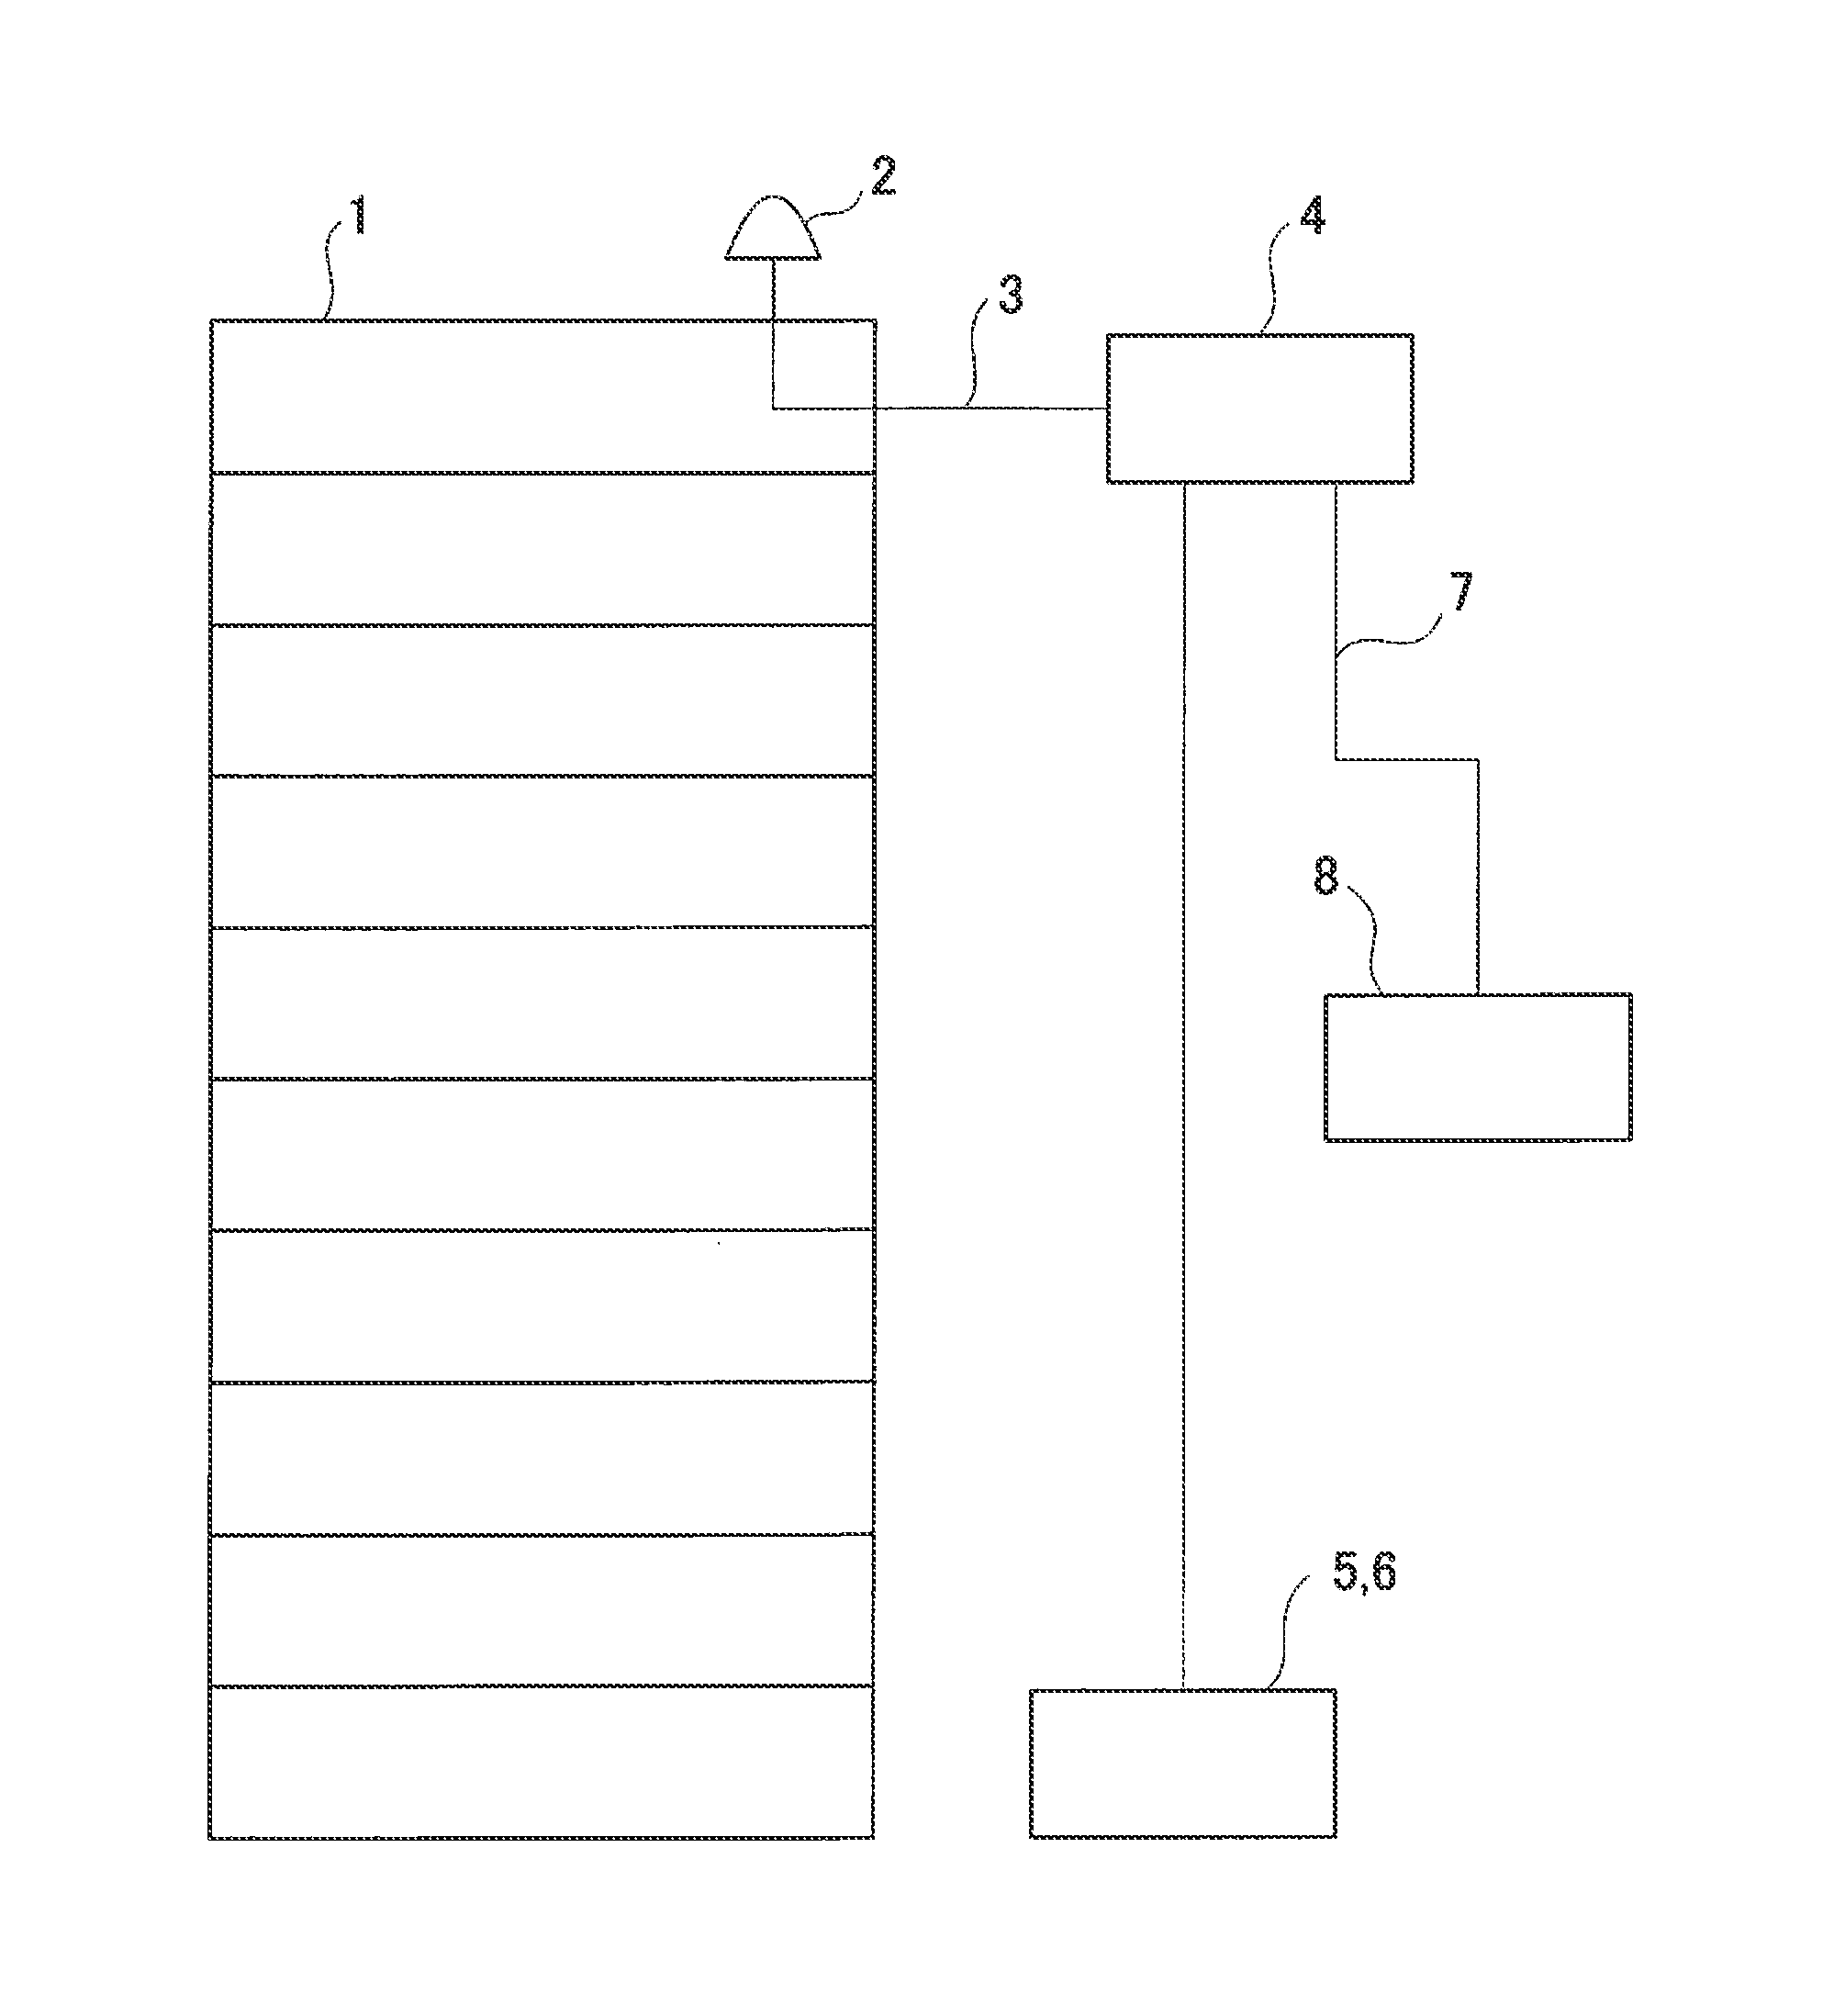 Safety Diagnosis System For Structure